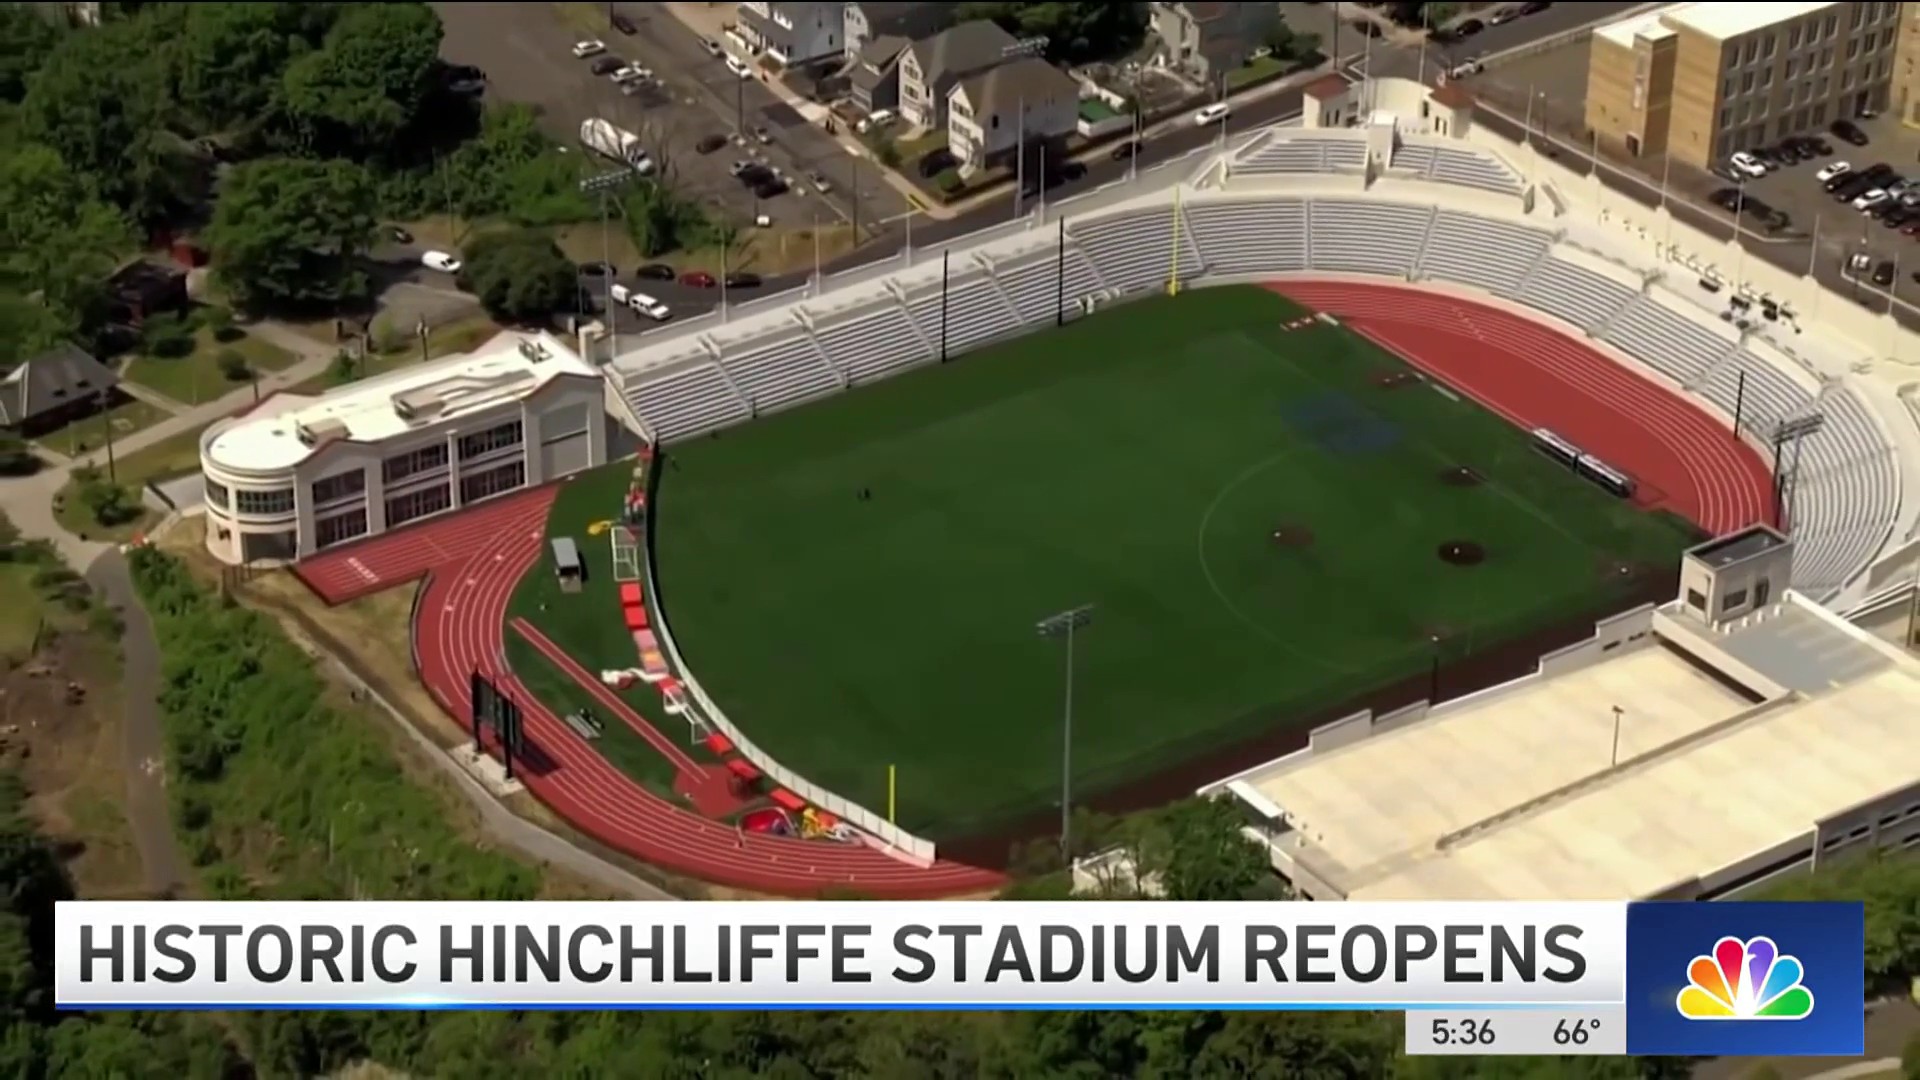 Hinchliffe Stadium Reopens After Redevelopment, Bringing History